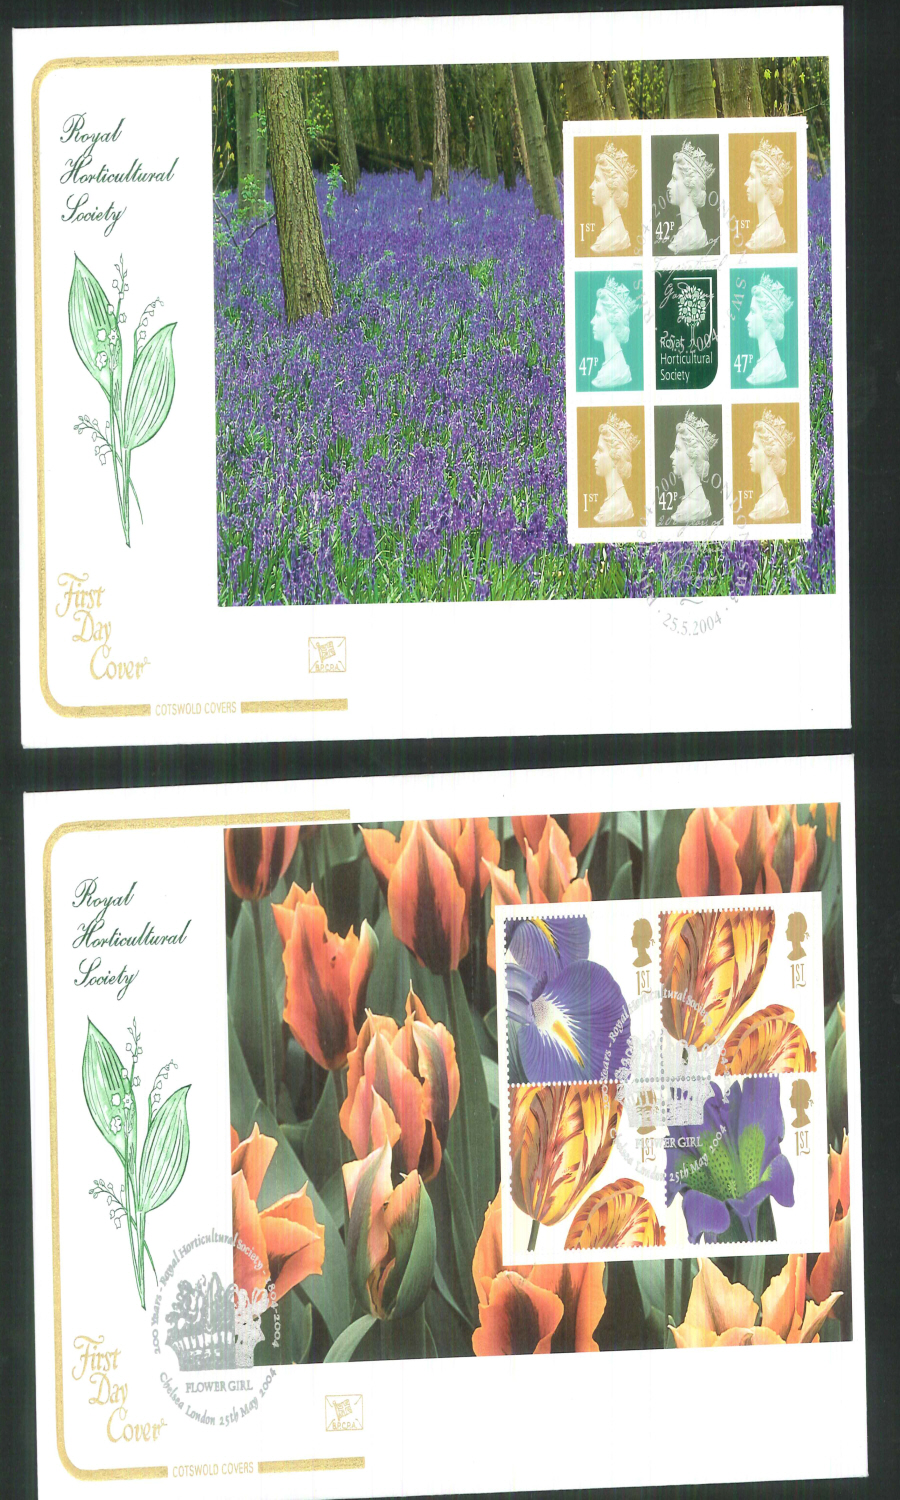 2004 - Royal Horticultural Society - Prestige Stamp Book Set of 4 Covers - Various Postmarks